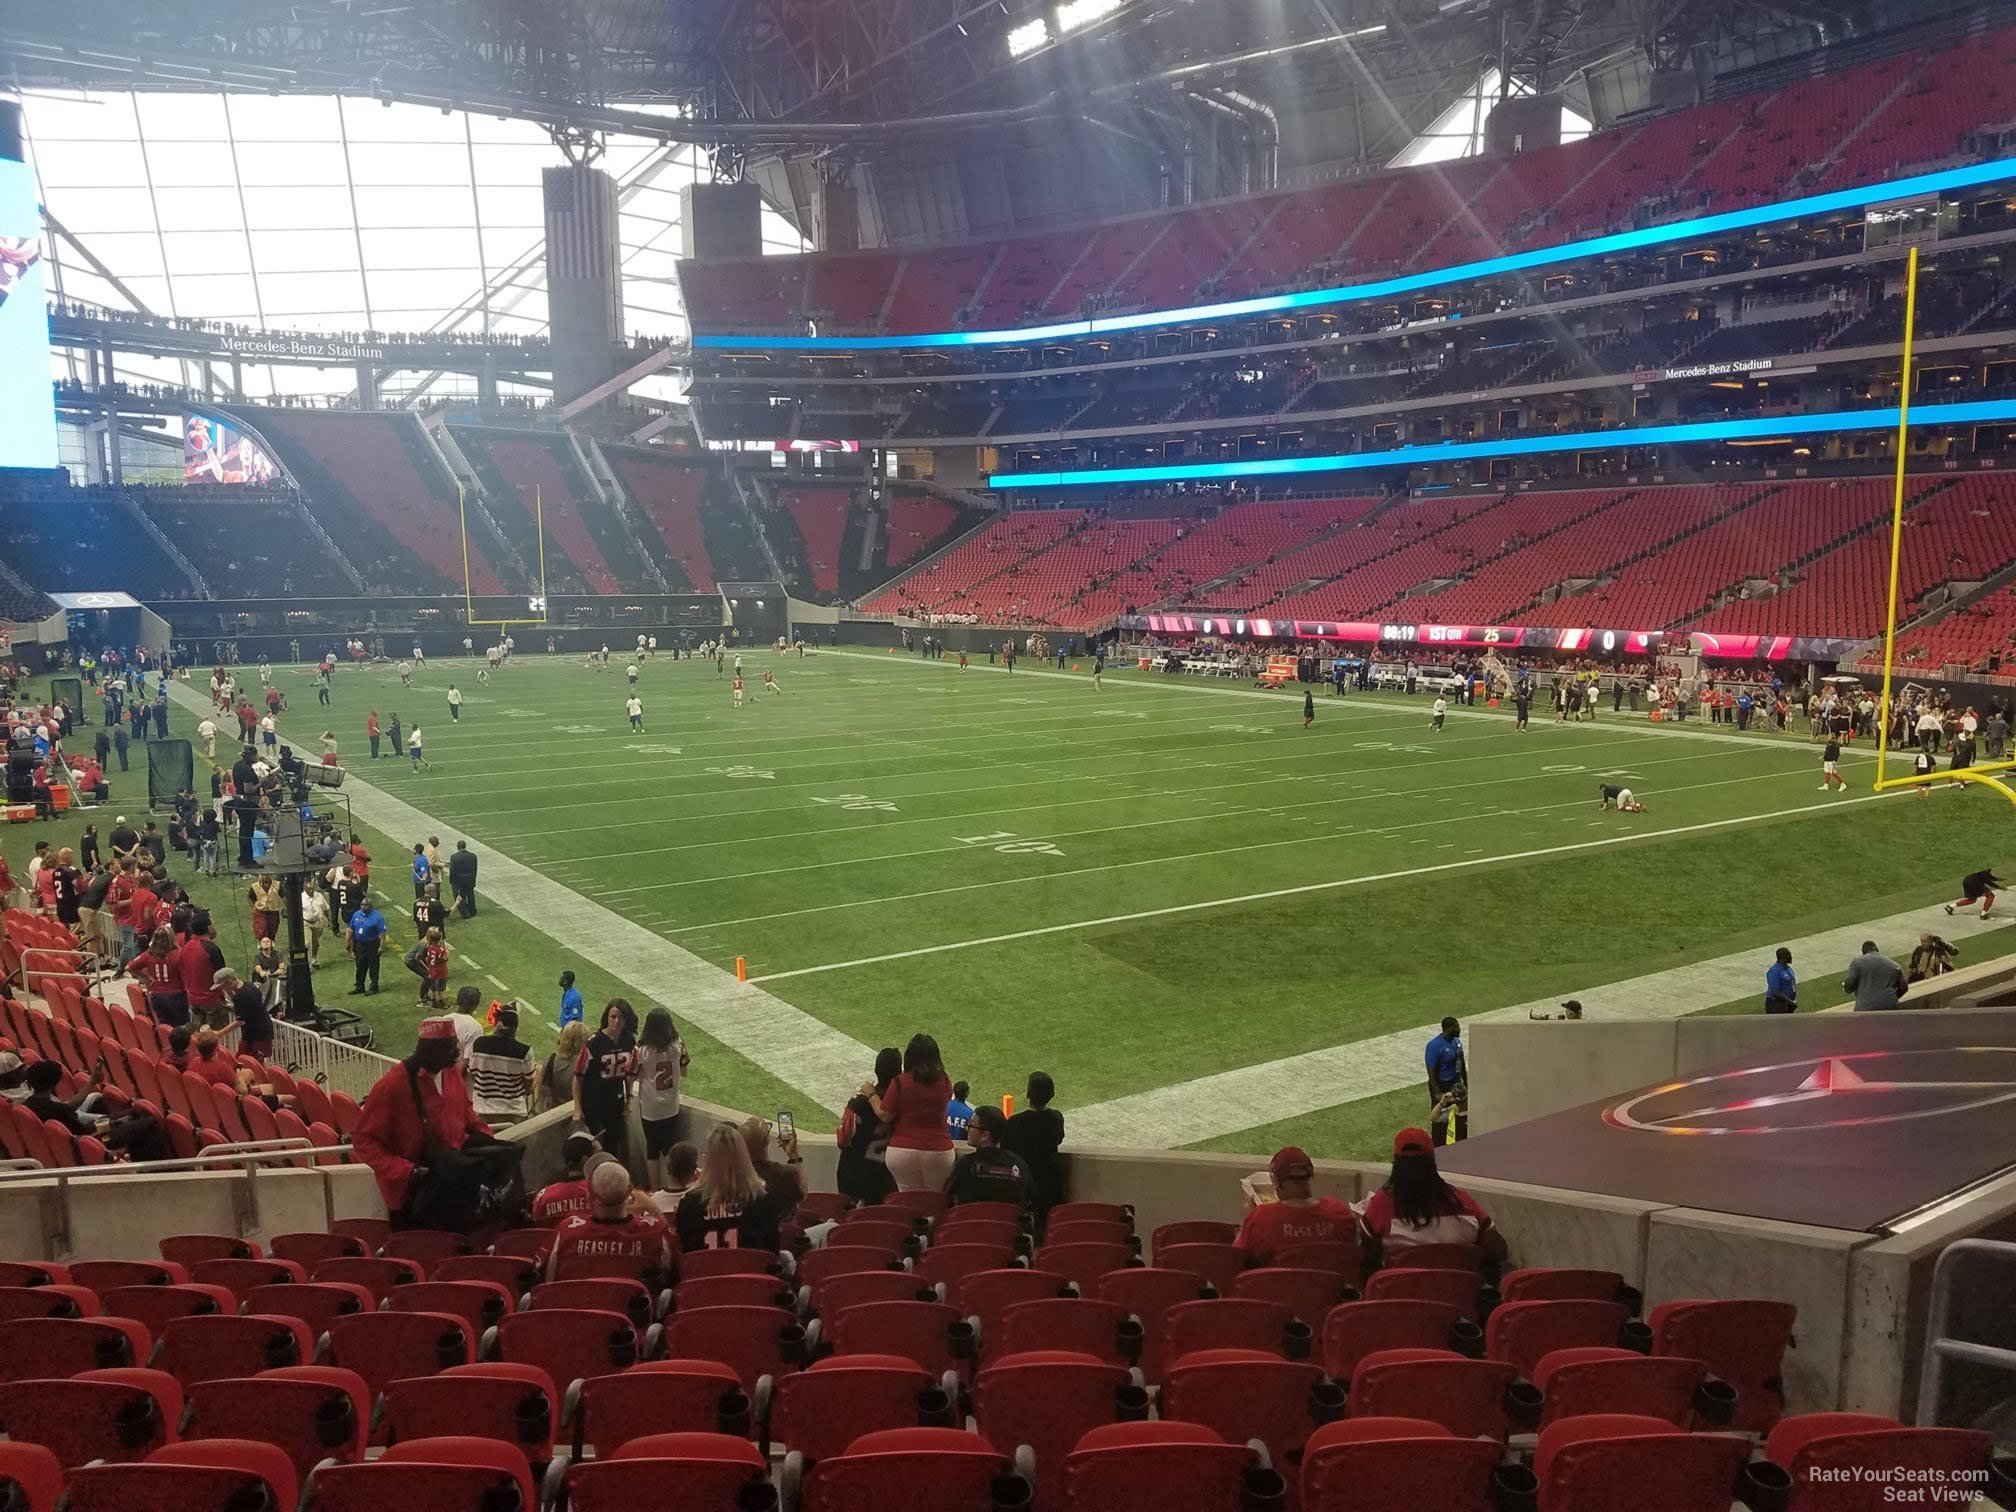 section 122, row 18 seat view  for football - mercedes-benz stadium